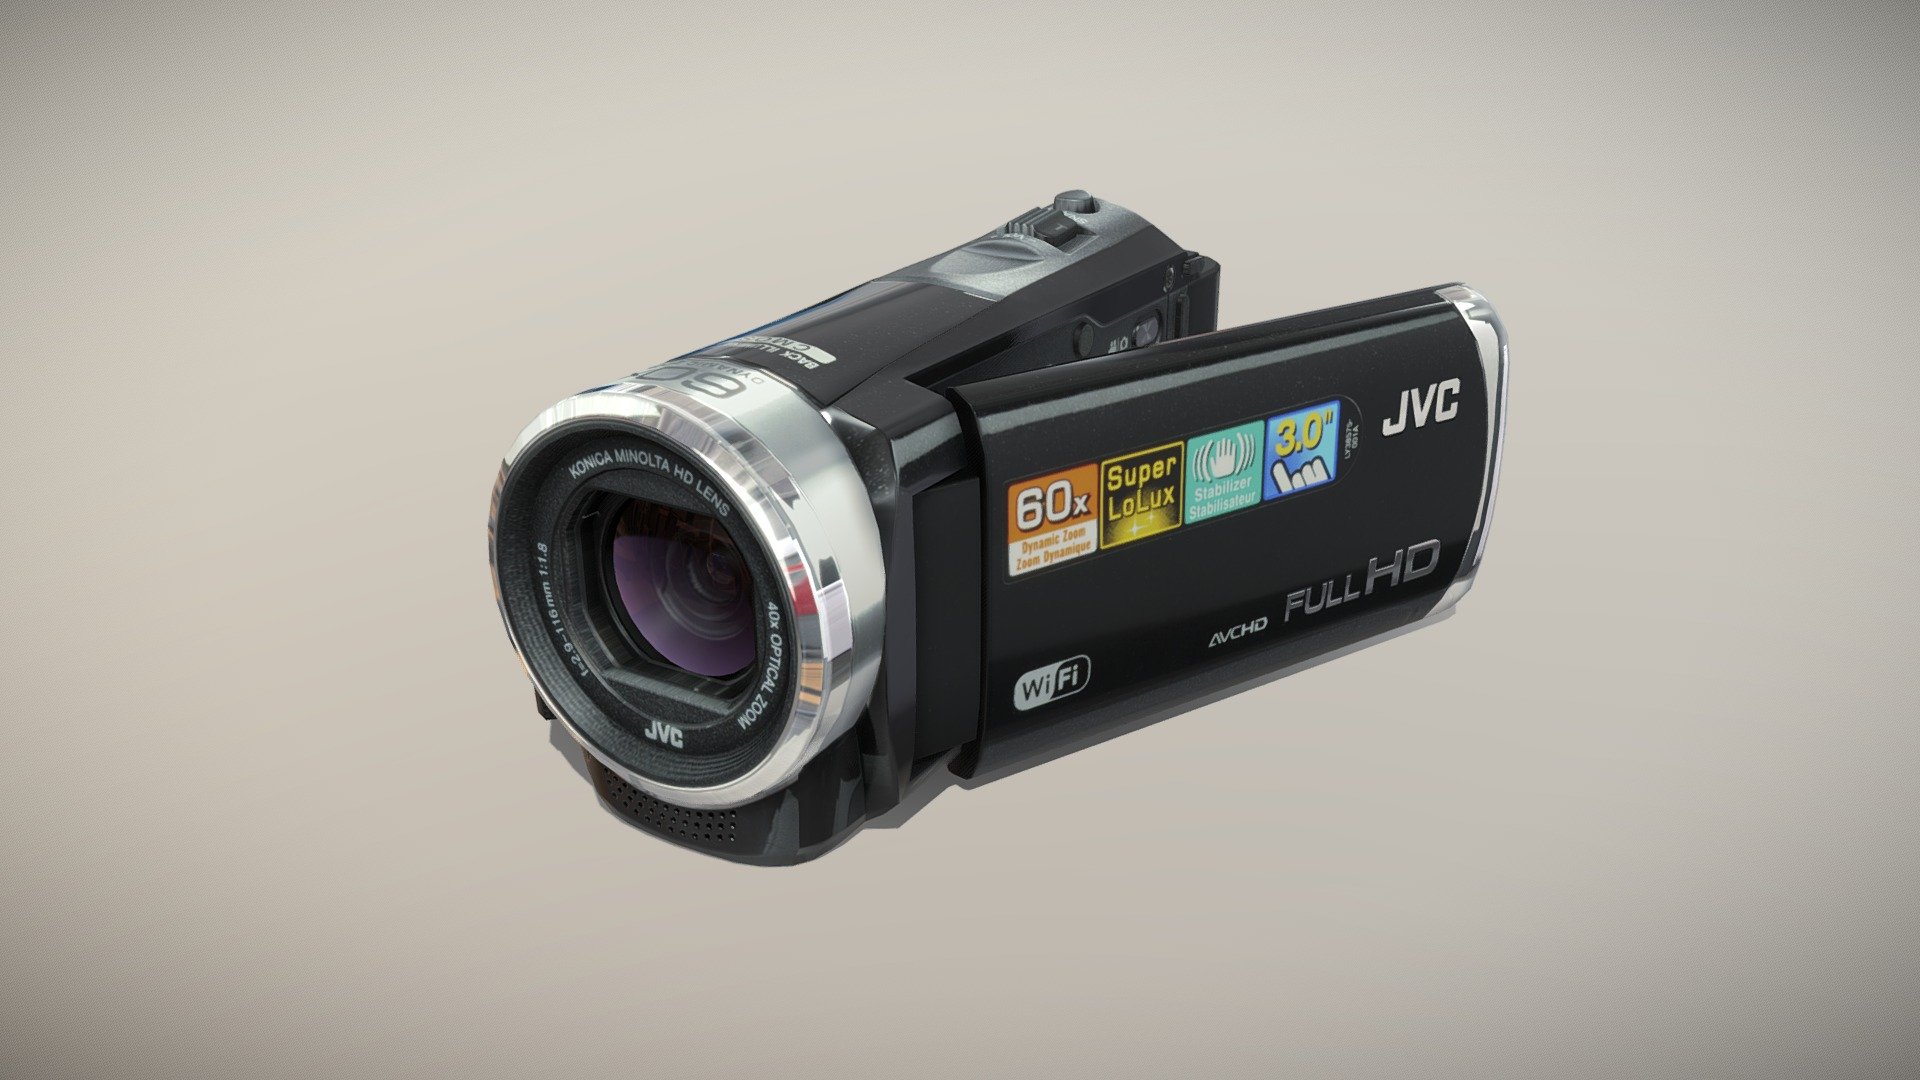 •   Let me present to you high-quality low-poly 3D model JVC EX310 Black. Modeling was made with ortho-photos of real camcorder that is why all details of design are recreated most authentically.

•   This model consists of a few meshes, it is low-polygonal and it has three materials (for Body, Belt and Glass of Lenses).

•   The total of the main textures is 7. Resolutions of all textures are 4096 pixels square aspect ratio in .png format. Also there is original texture file .PSD format in separate archive.

•   Polygon count of the model is – 6034.

•   The model has correct dimensions in real-world scale. All parts grouped and named correctly.

•   To use the model in other 3D programs there are scenes saved in formats .fbx, .obj, .DAE, .max (2010 version).

Note: If you see some artifacts on the textures, it means compression works in the Viewer. We recommend setting HD quality for textures. But anyway, original textures have no artifacts 3d model